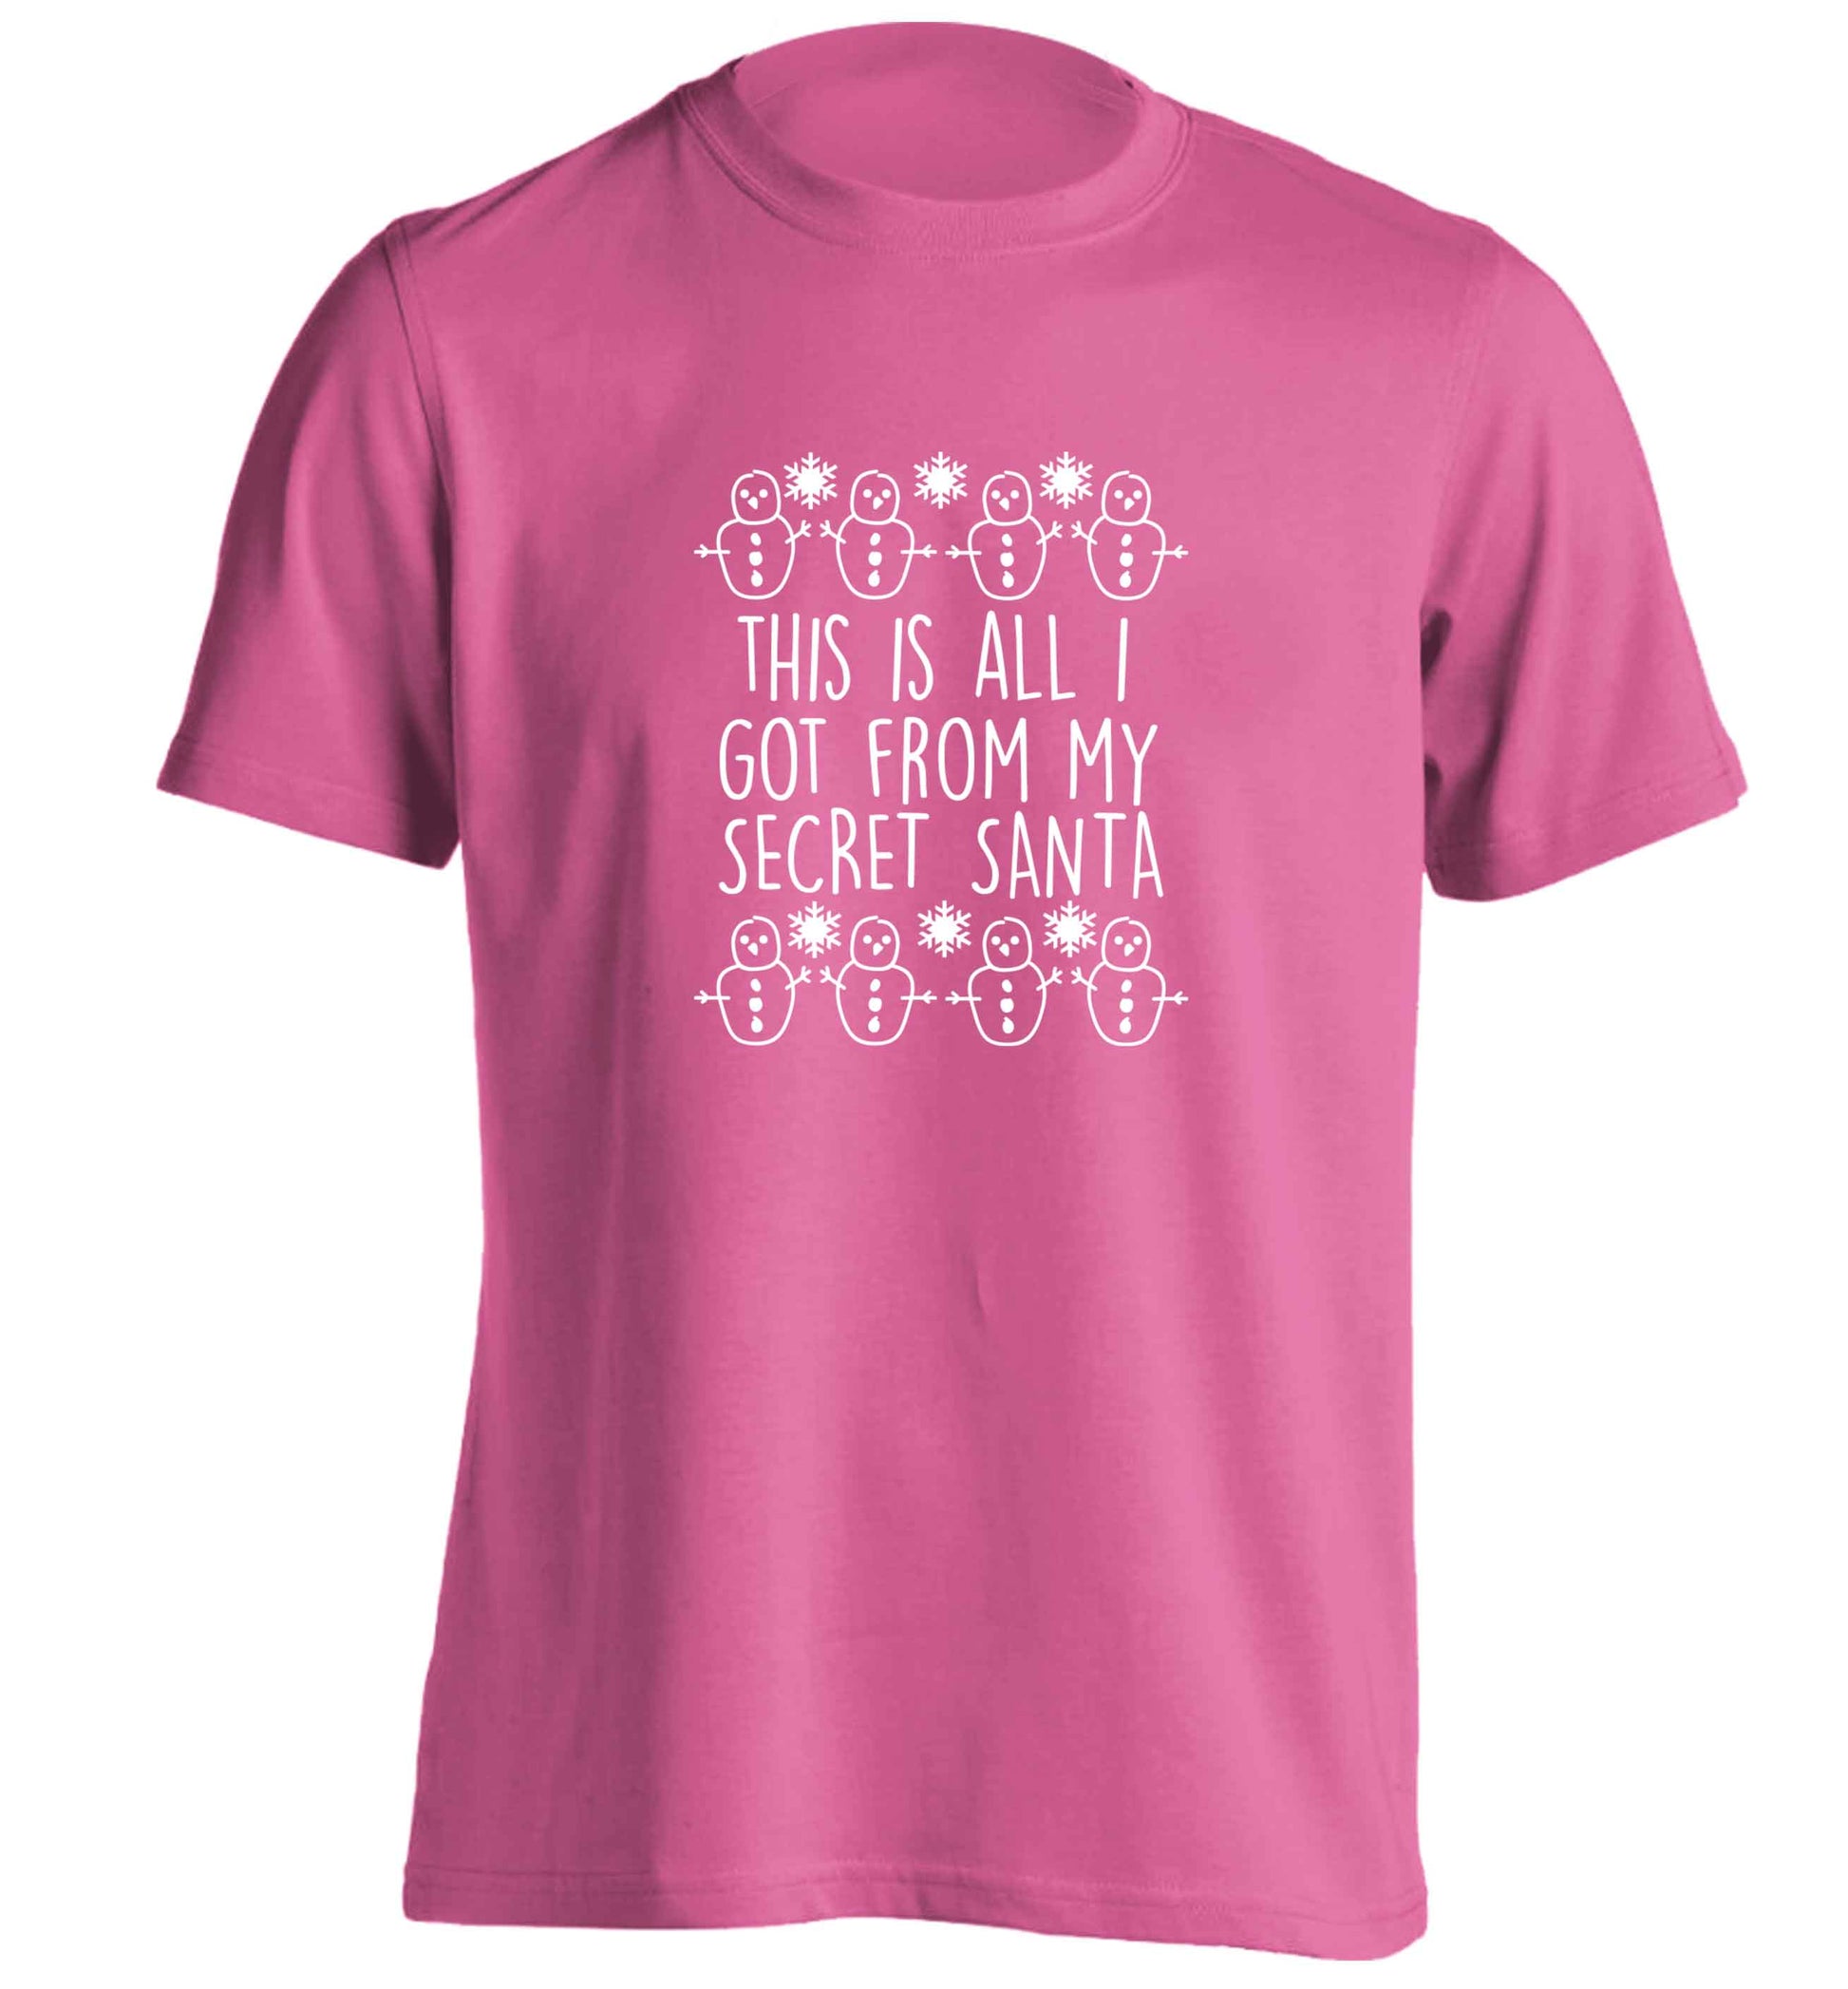 This is all I got from my secret Santa adults unisex pink Tshirt 2XL